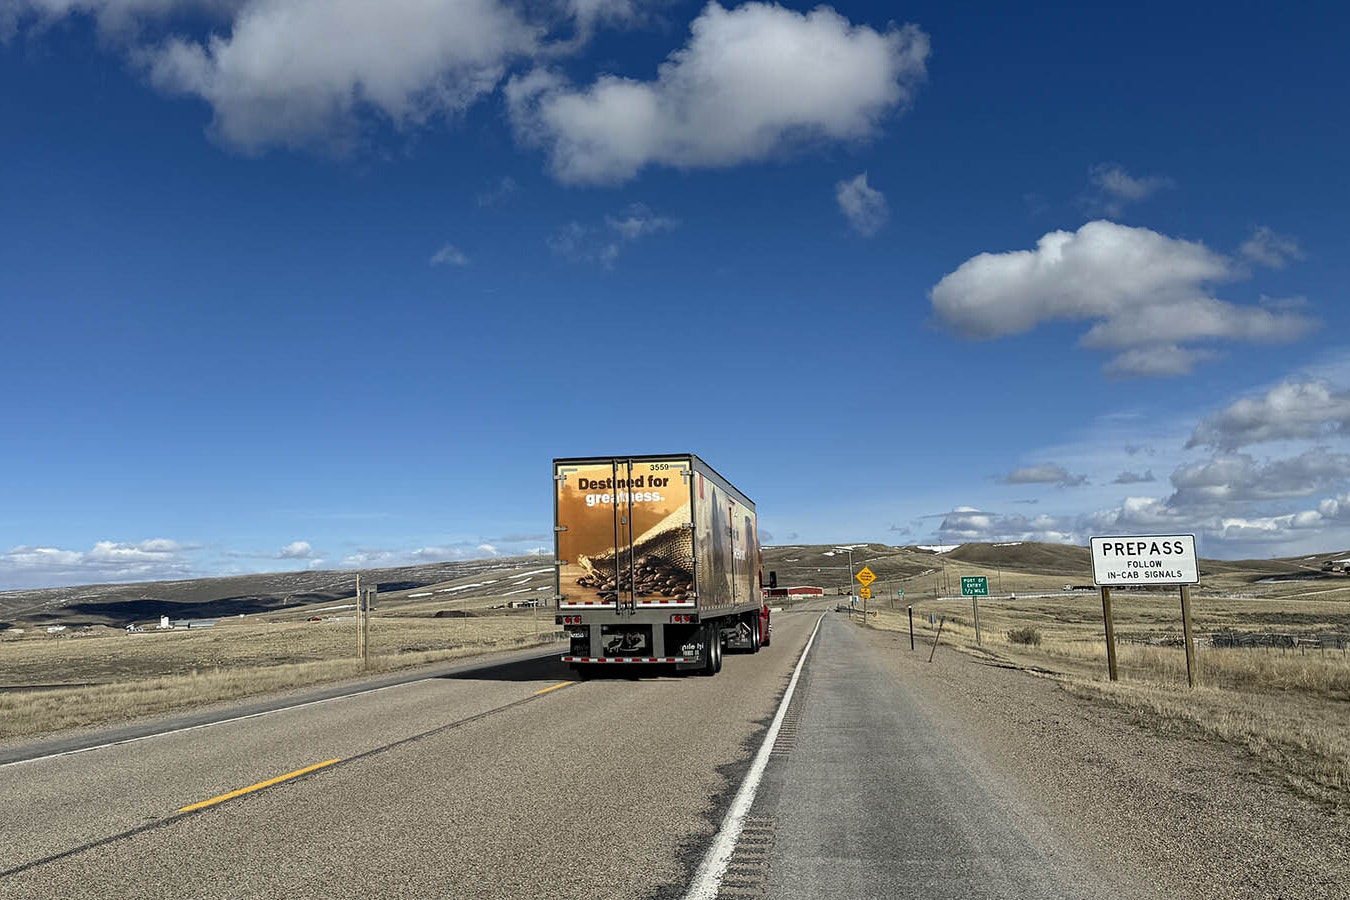 A 2.71-mile stretch of US Highway 30 near the Kemmerer port of entry will be realigned to the north so that a coal mine operator can access more than 9 million tons of coal reserves.  The road will be moved to the left of the truck that is heading toward the port of entry.